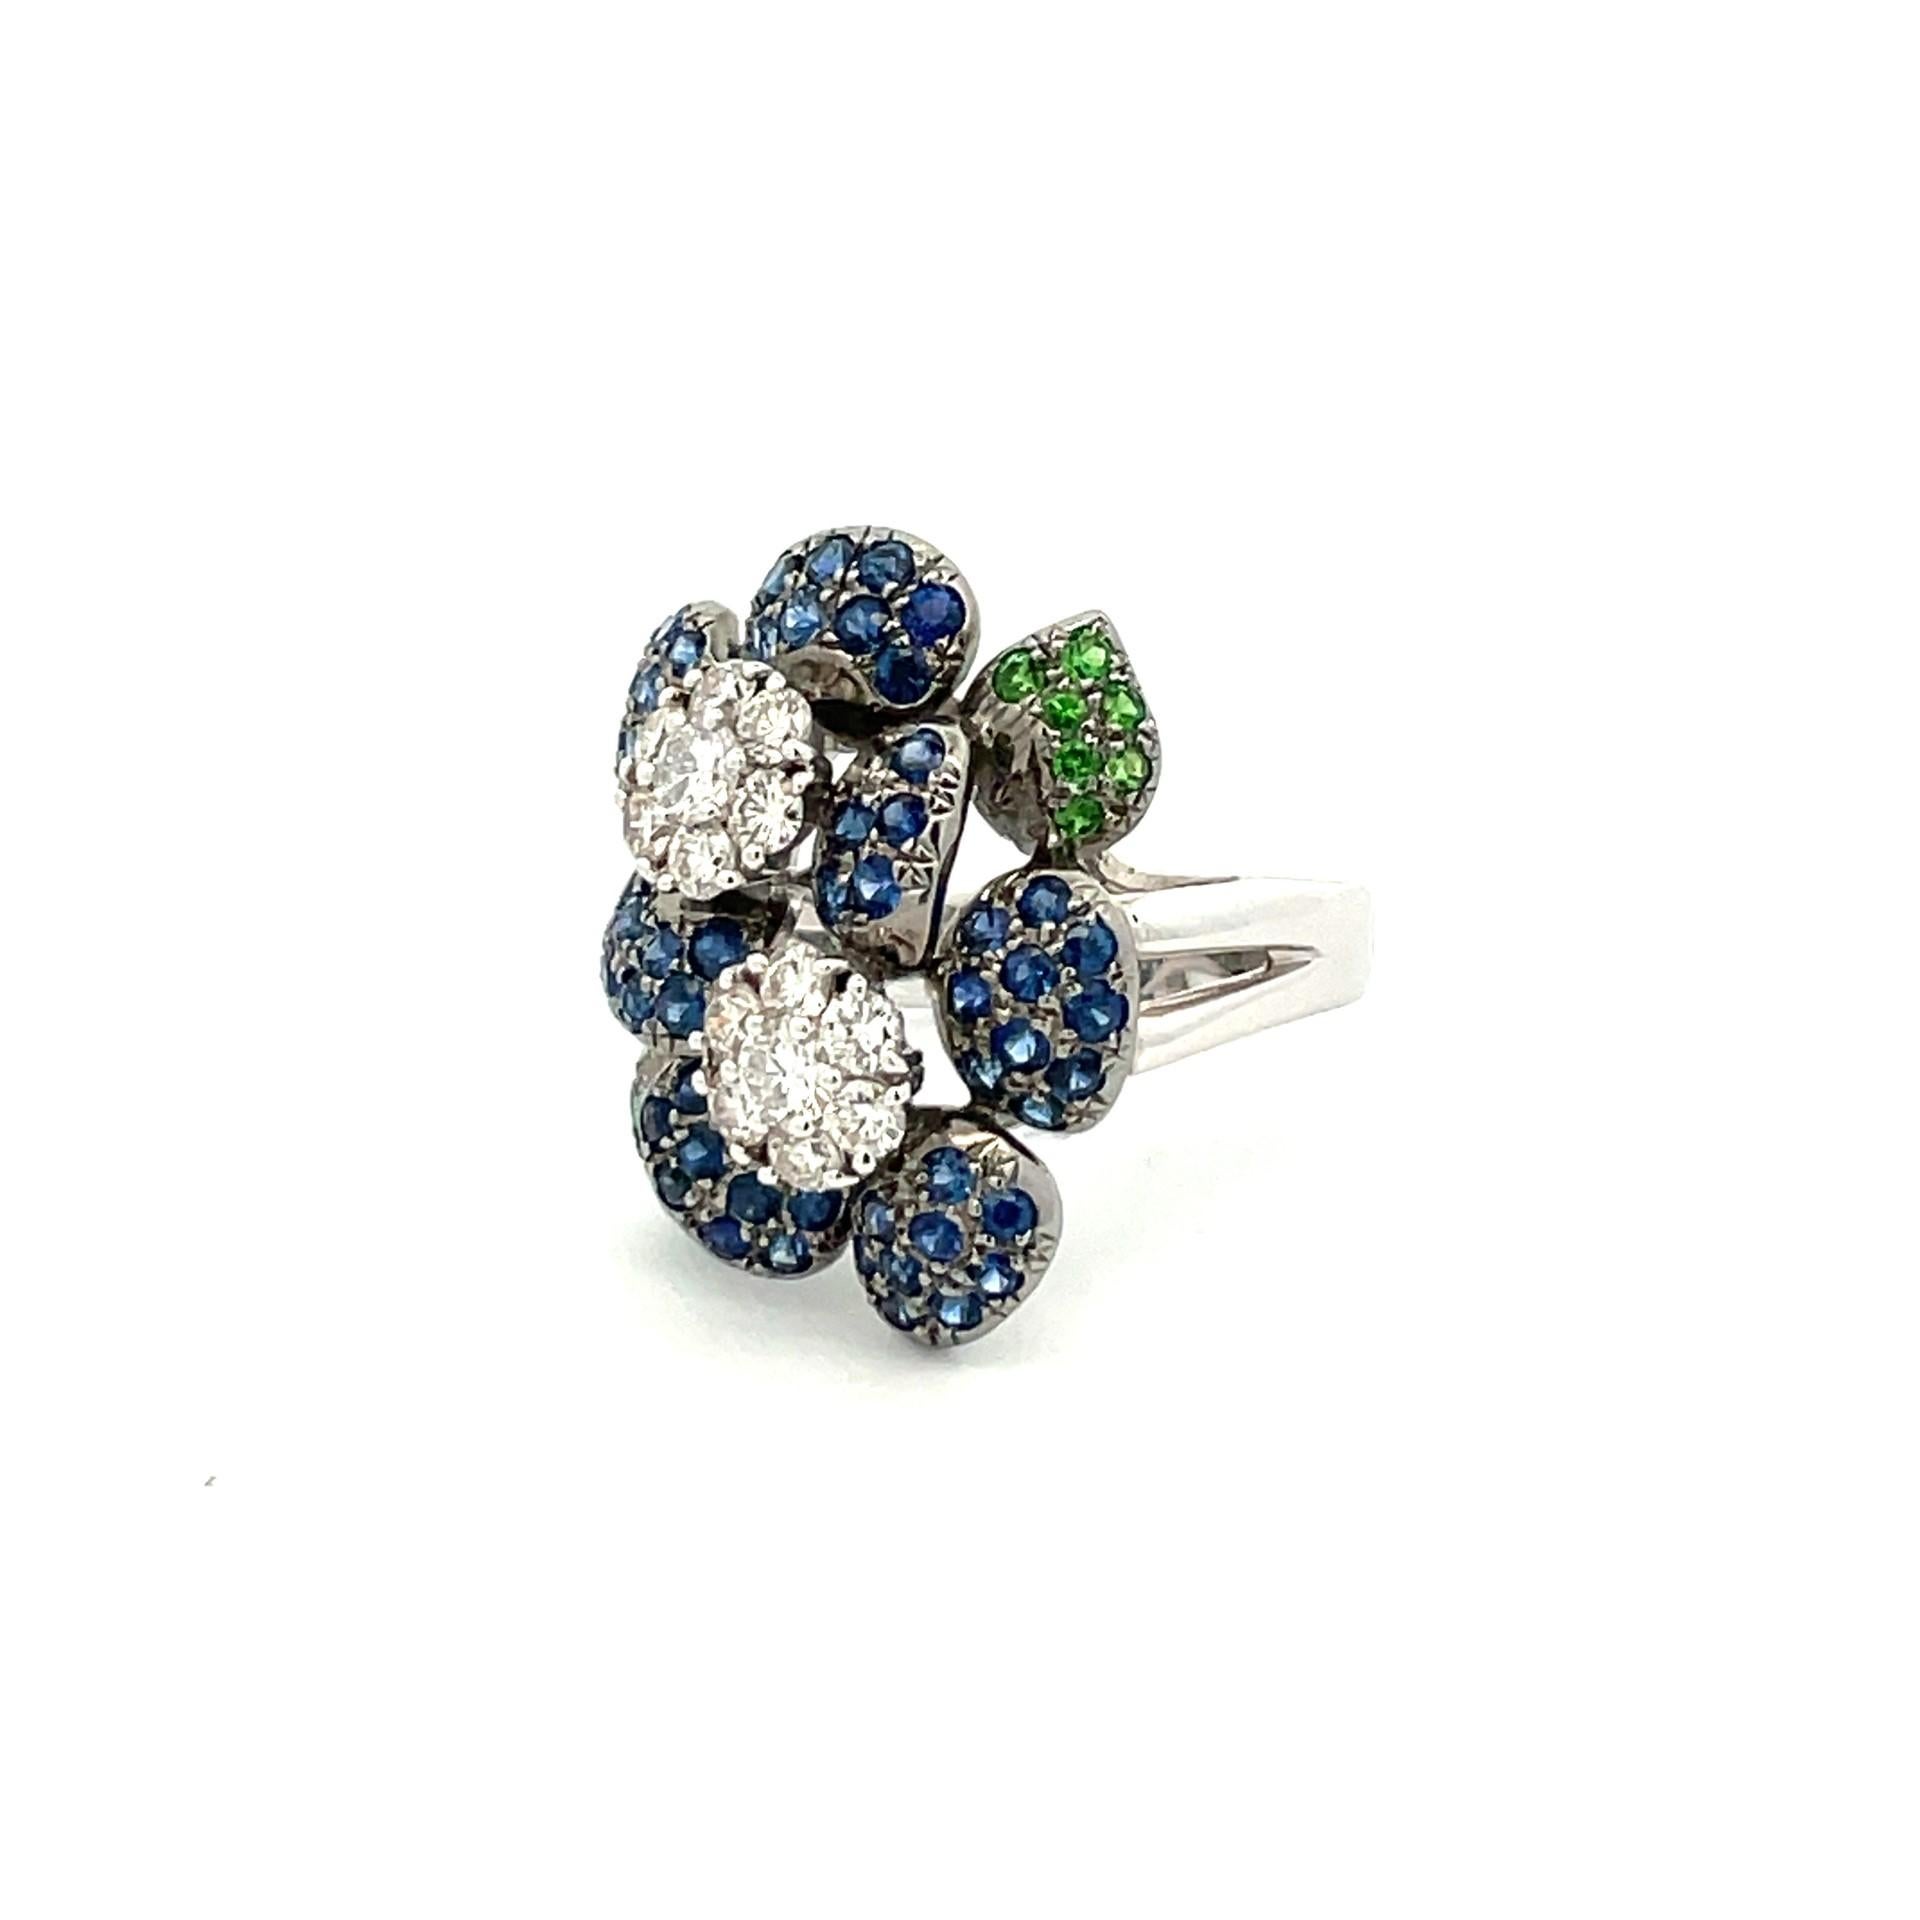 Blooming with sophistication this flower pave ring with natural blue sapphires, natural white diamonds and green garnet in 18kt white gold.

59 natural blue sapphires 1.70ct total weight

11 natural green garnets  .23ct total weight

16 brilliant